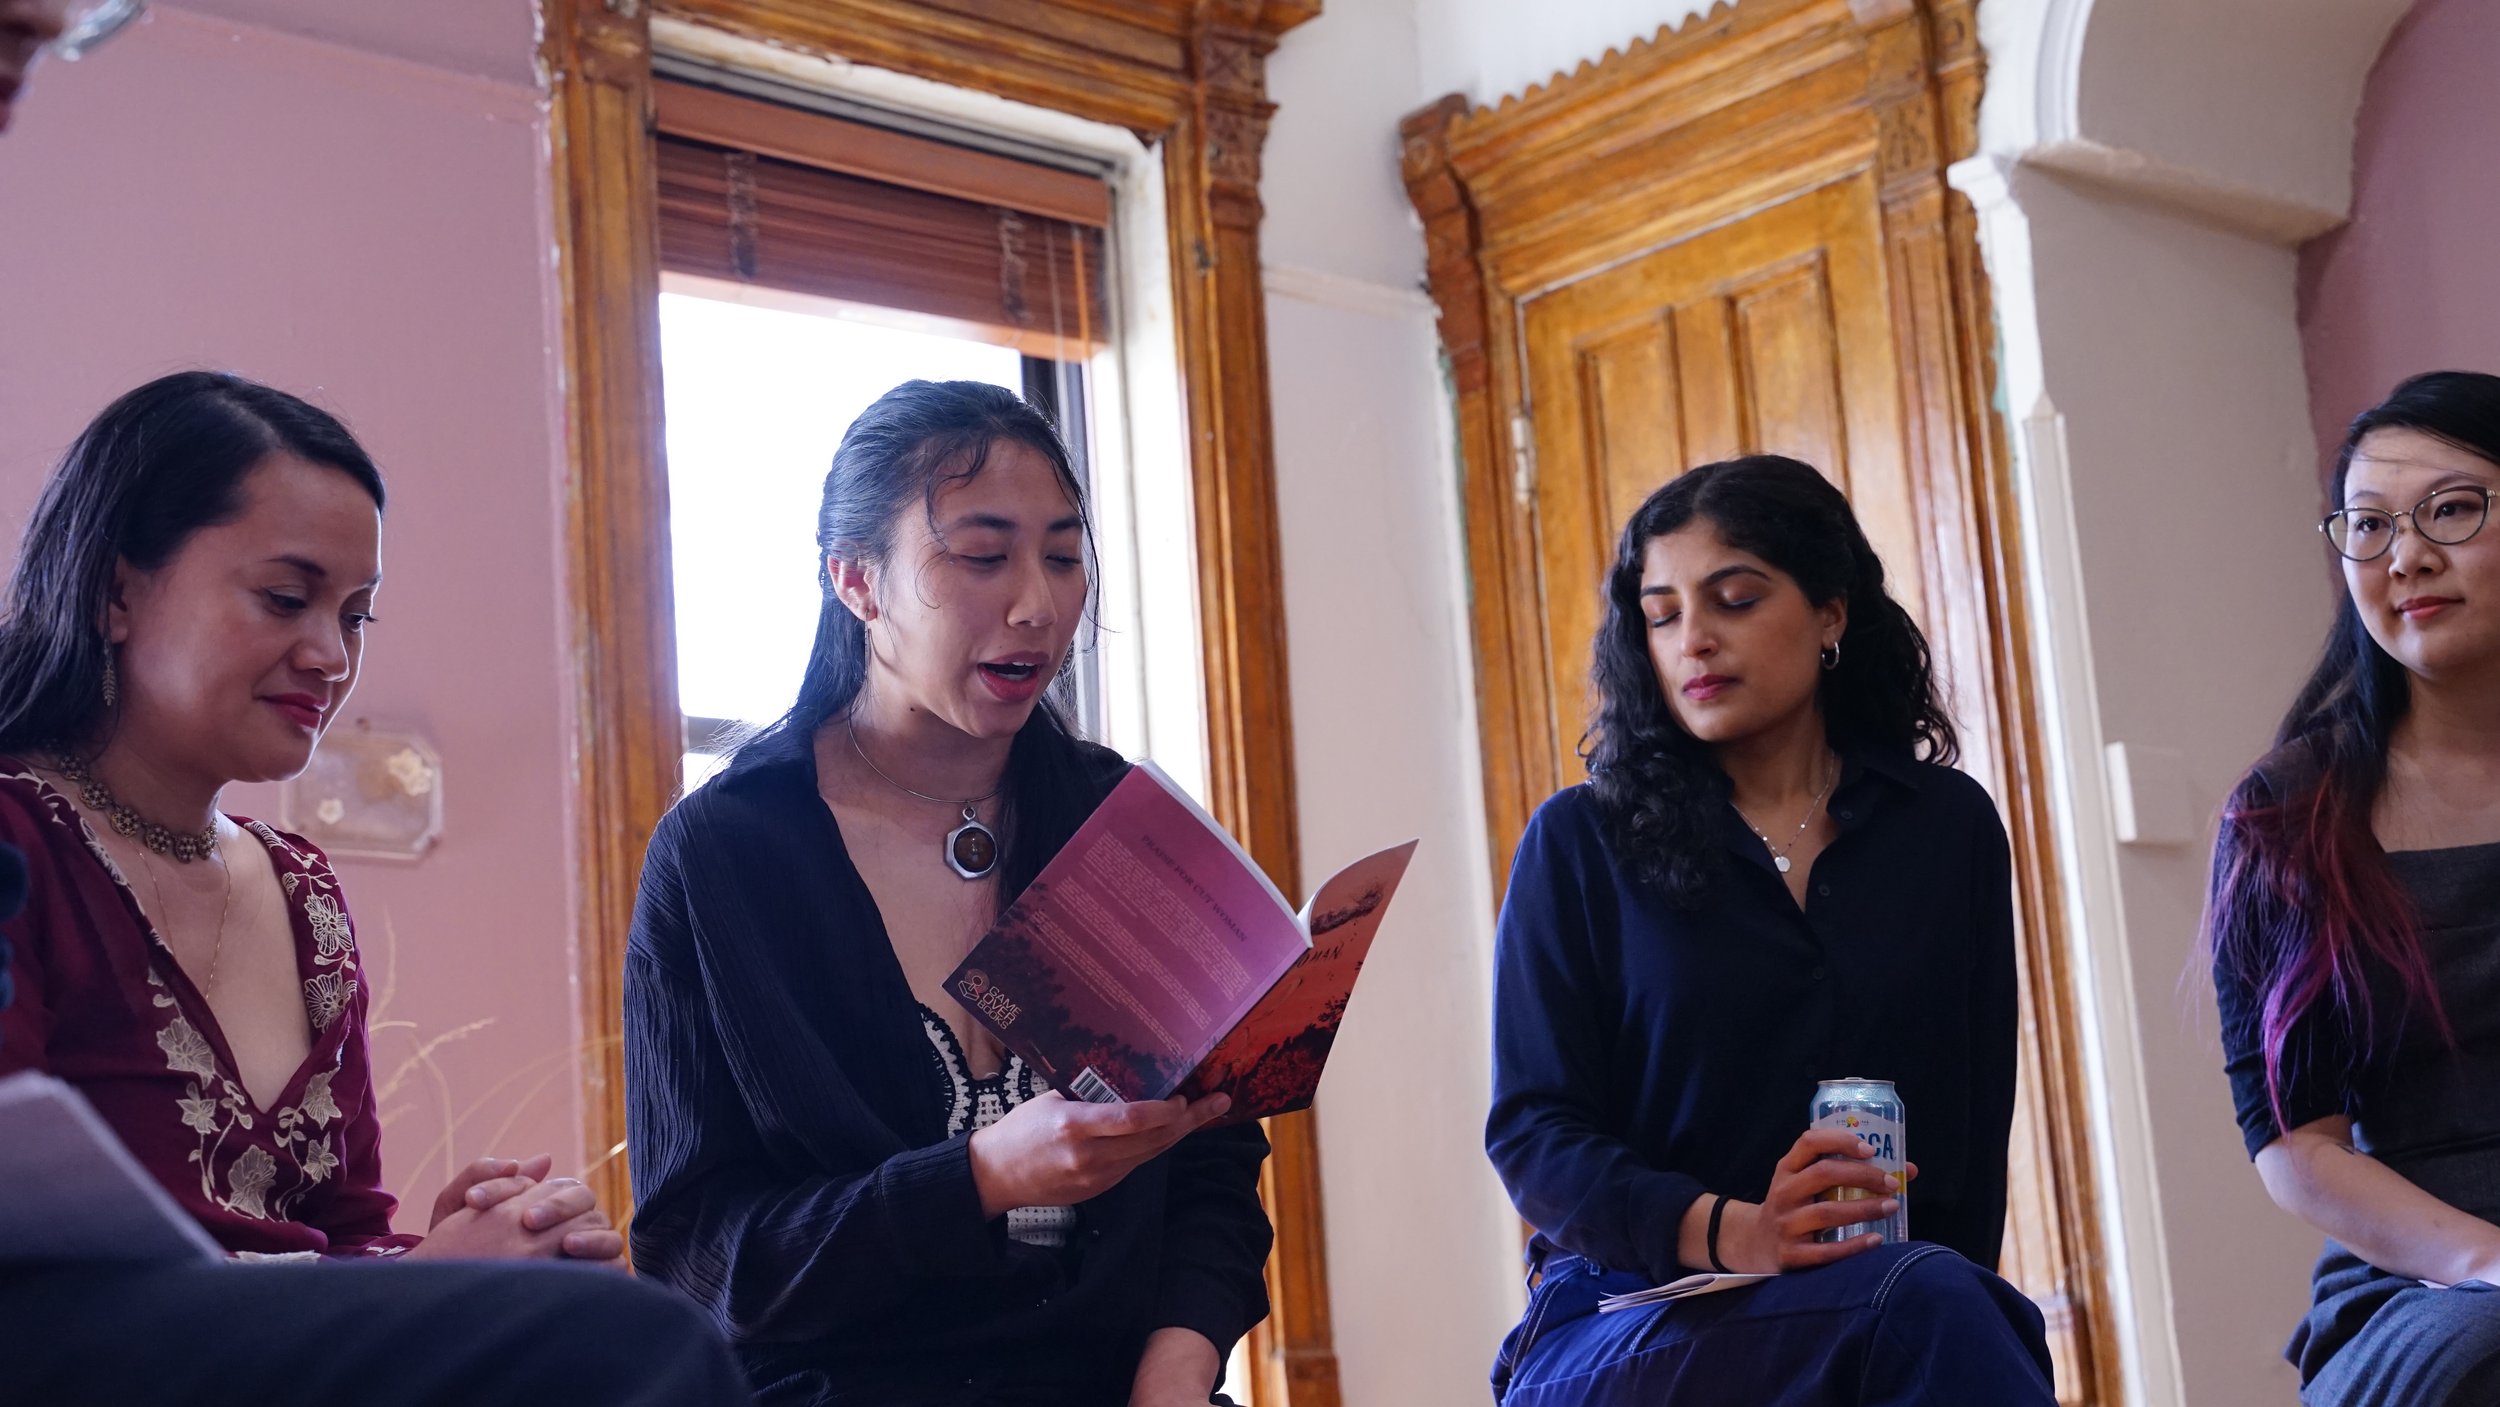  Public Poetry Reading on April 1st, 2023. Photo by Angela Chang, courtesy of Fou Gallery 